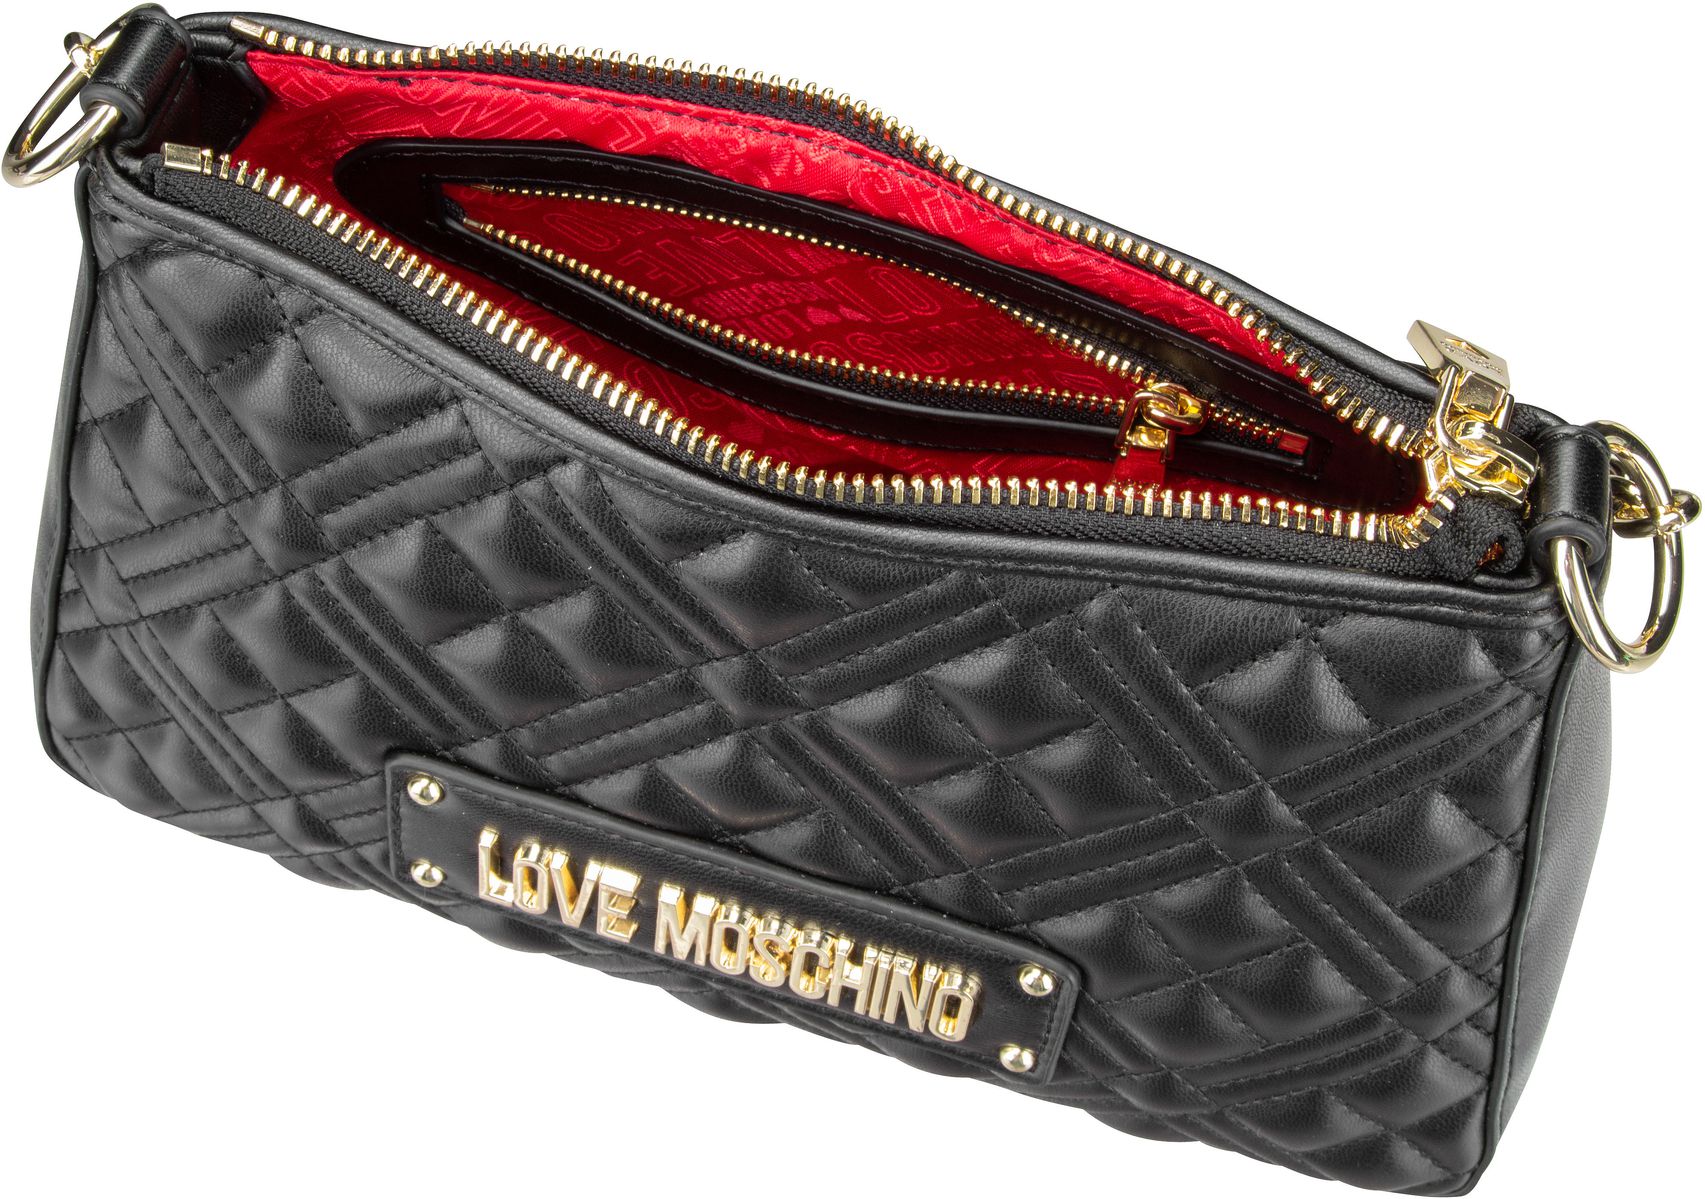 Love Moschino Quilted Bag 4135 - Black